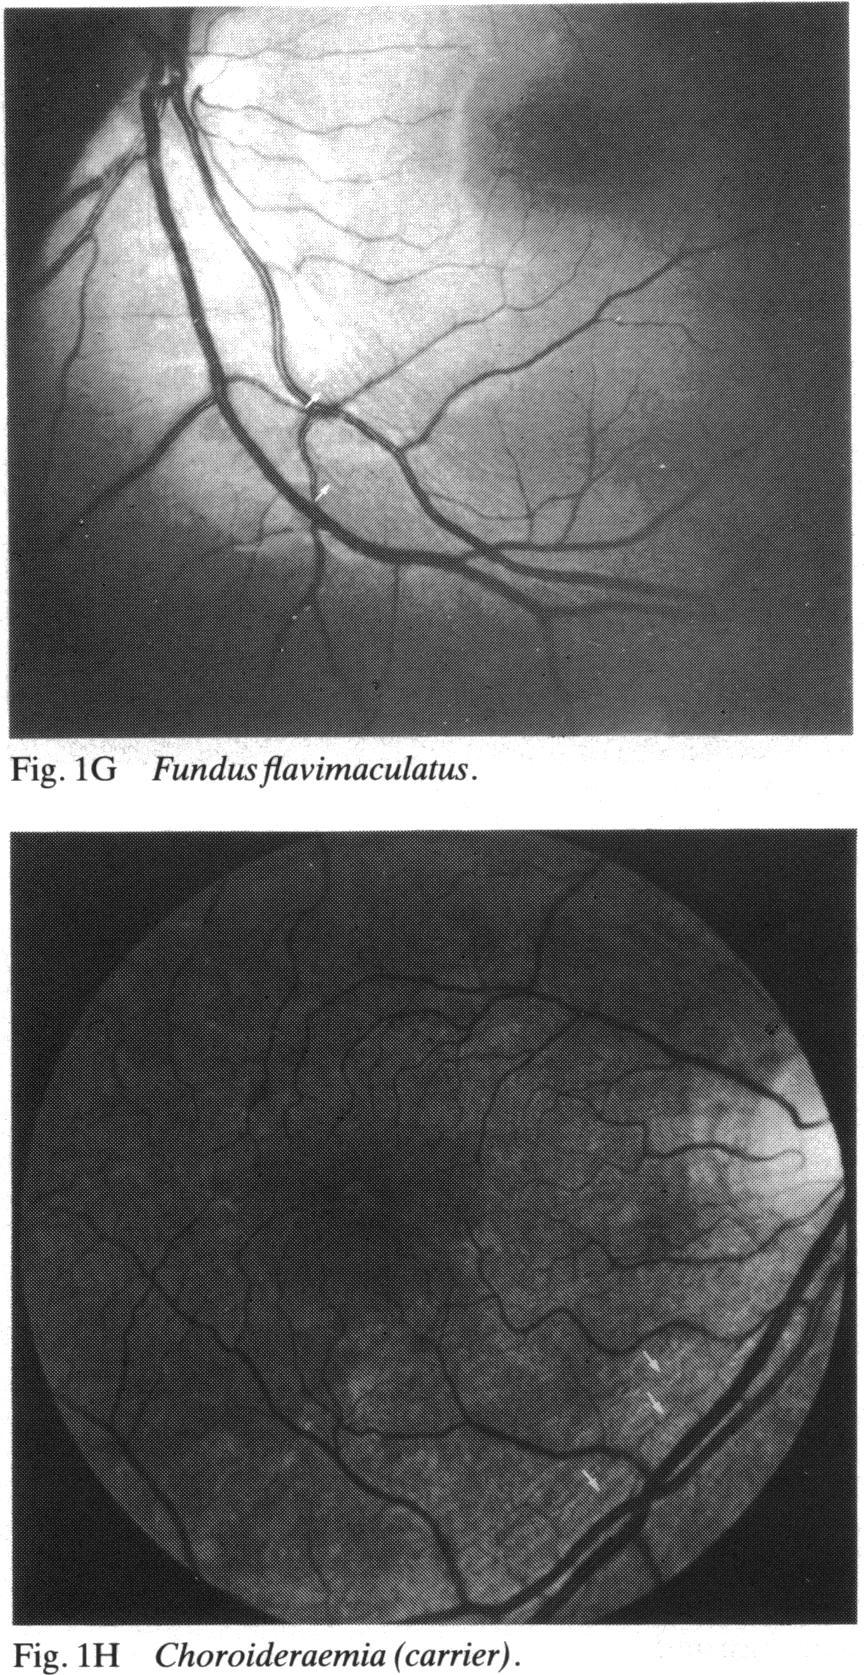 In previously reported cases of damage to the retinal nerve fibre layer the primary insult has been to the optic nerve or another portion of the ganglion cell axon, such as the chiasm.